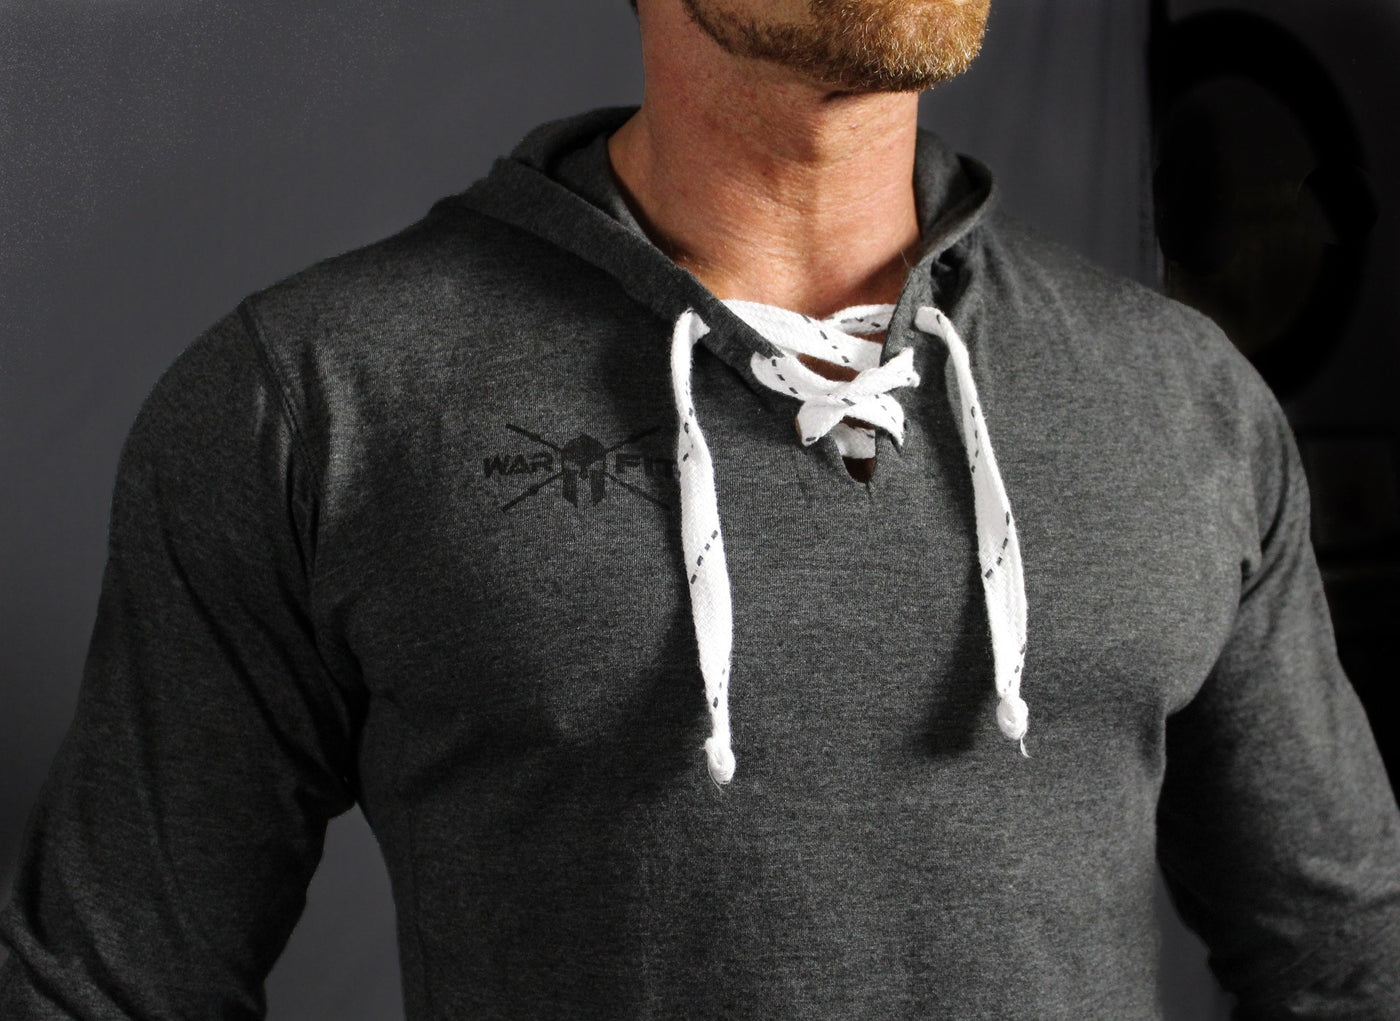 Premium Laced Strength & Passion Hooded Pullover - WARFIT CLOTHING CO.™ - 5